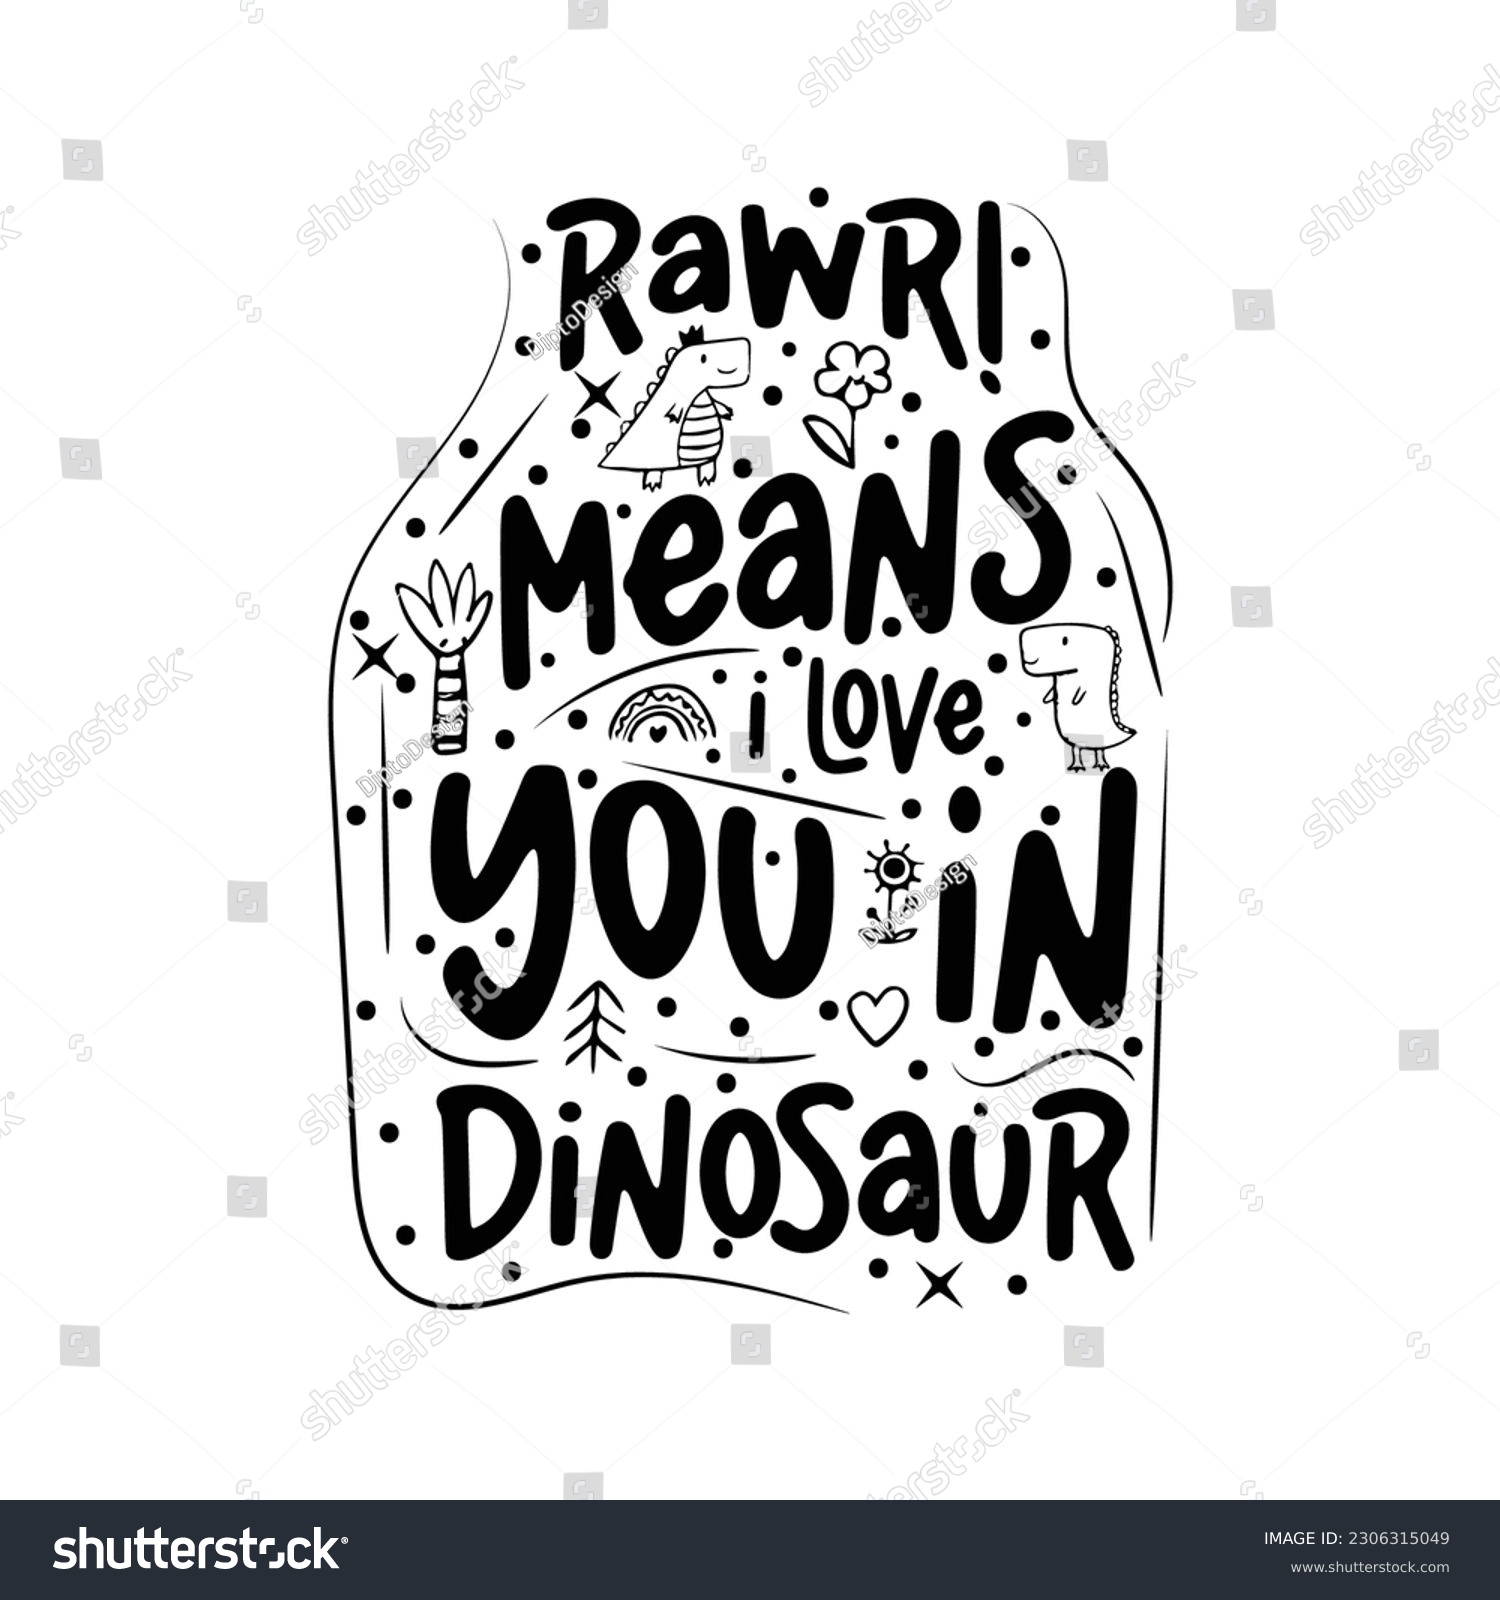 SVG of rawr means i love you in dinosaur concept. Inspirational saying. Motivational lettering. Handwritten motivational phrases for typography posters, tee shirt prints, and gift cards. svg